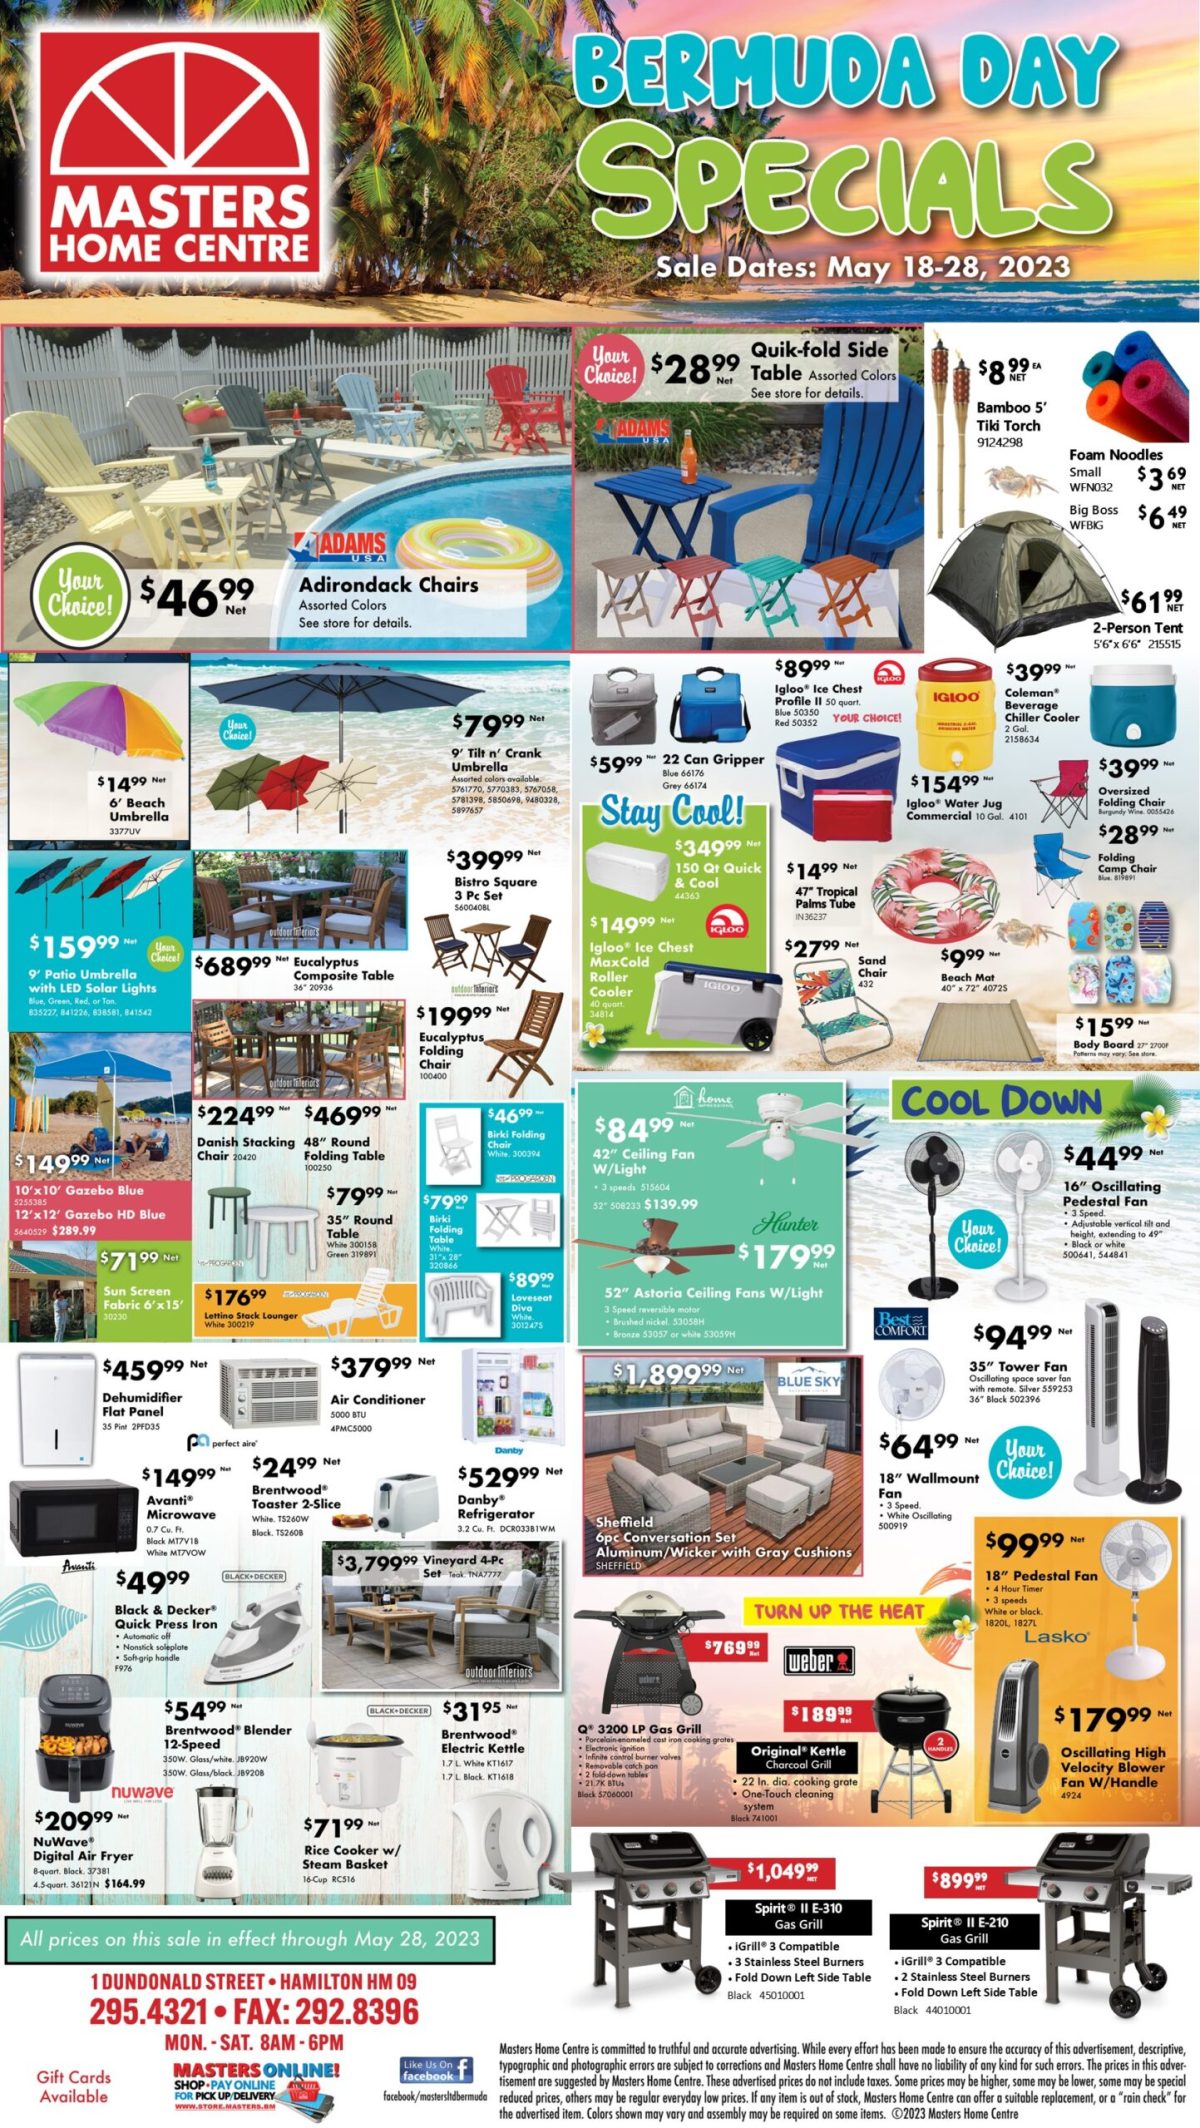 AD - Masters_Bermuda Day Specials 2023 (May18-28)_RG-Full Page_11.83x21